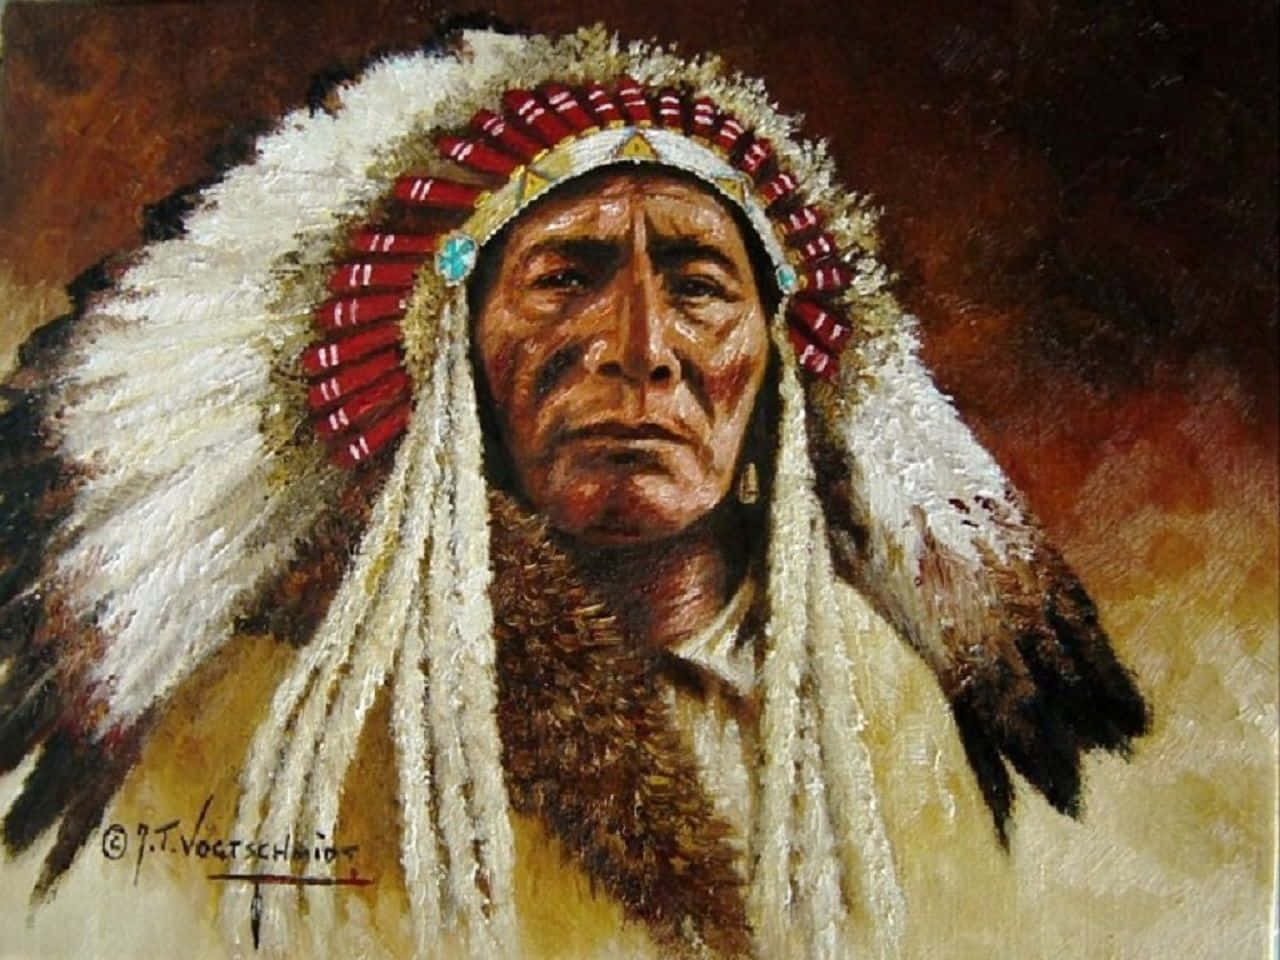 A Painting Of An Indian Chief Wearing A Feathered Headdress